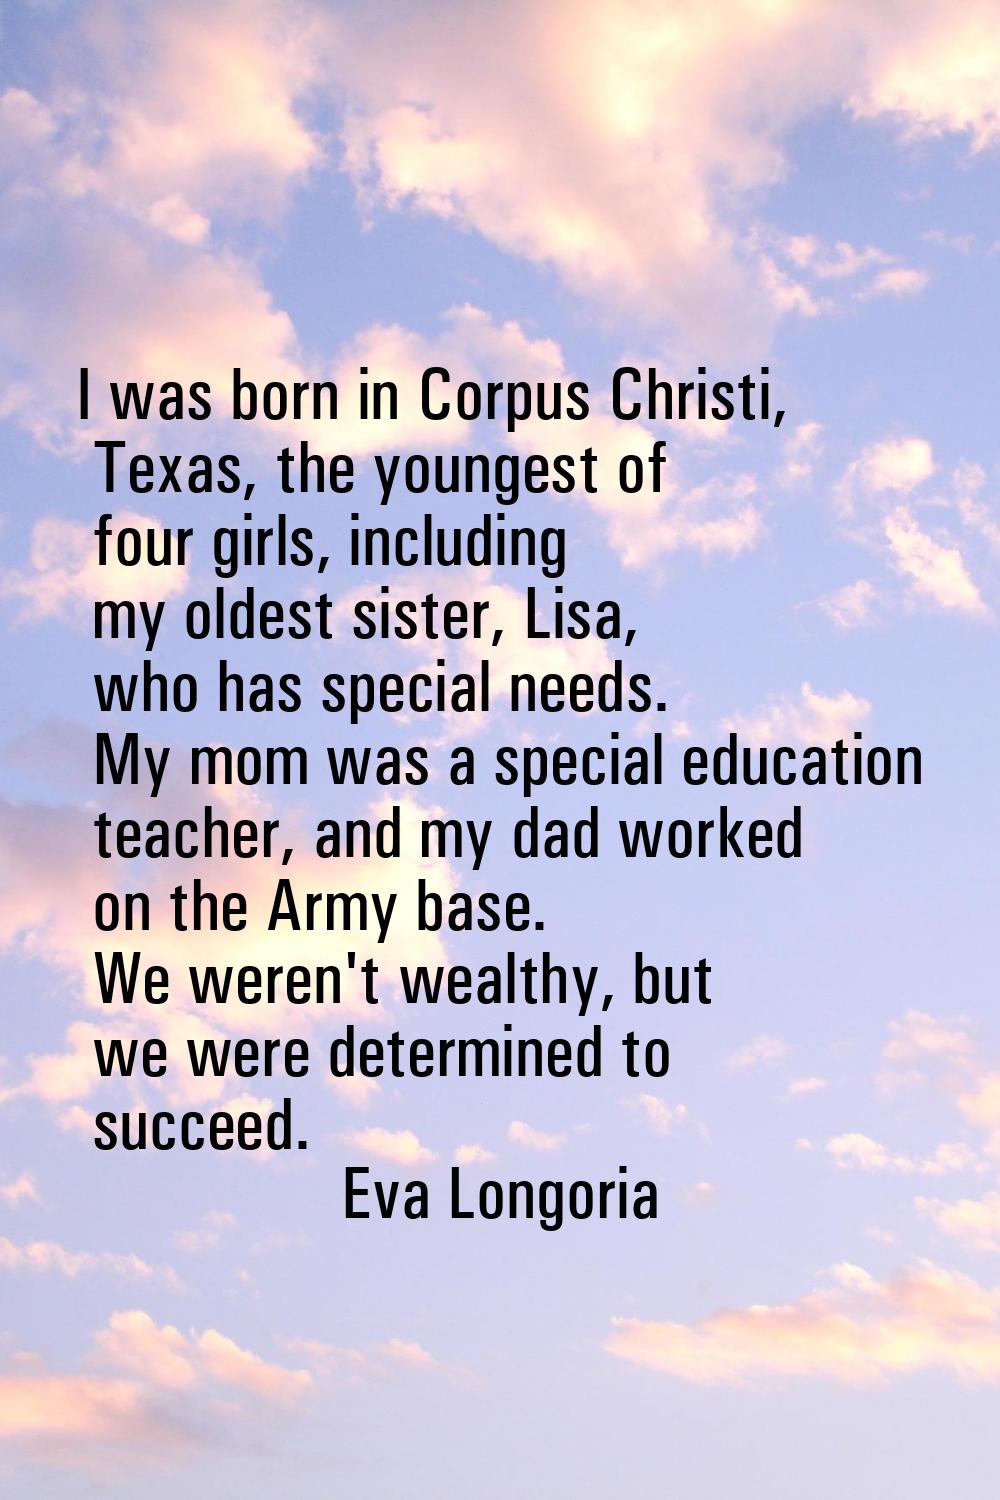 I was born in Corpus Christi, Texas, the youngest of four girls, including my oldest sister, Lisa, 